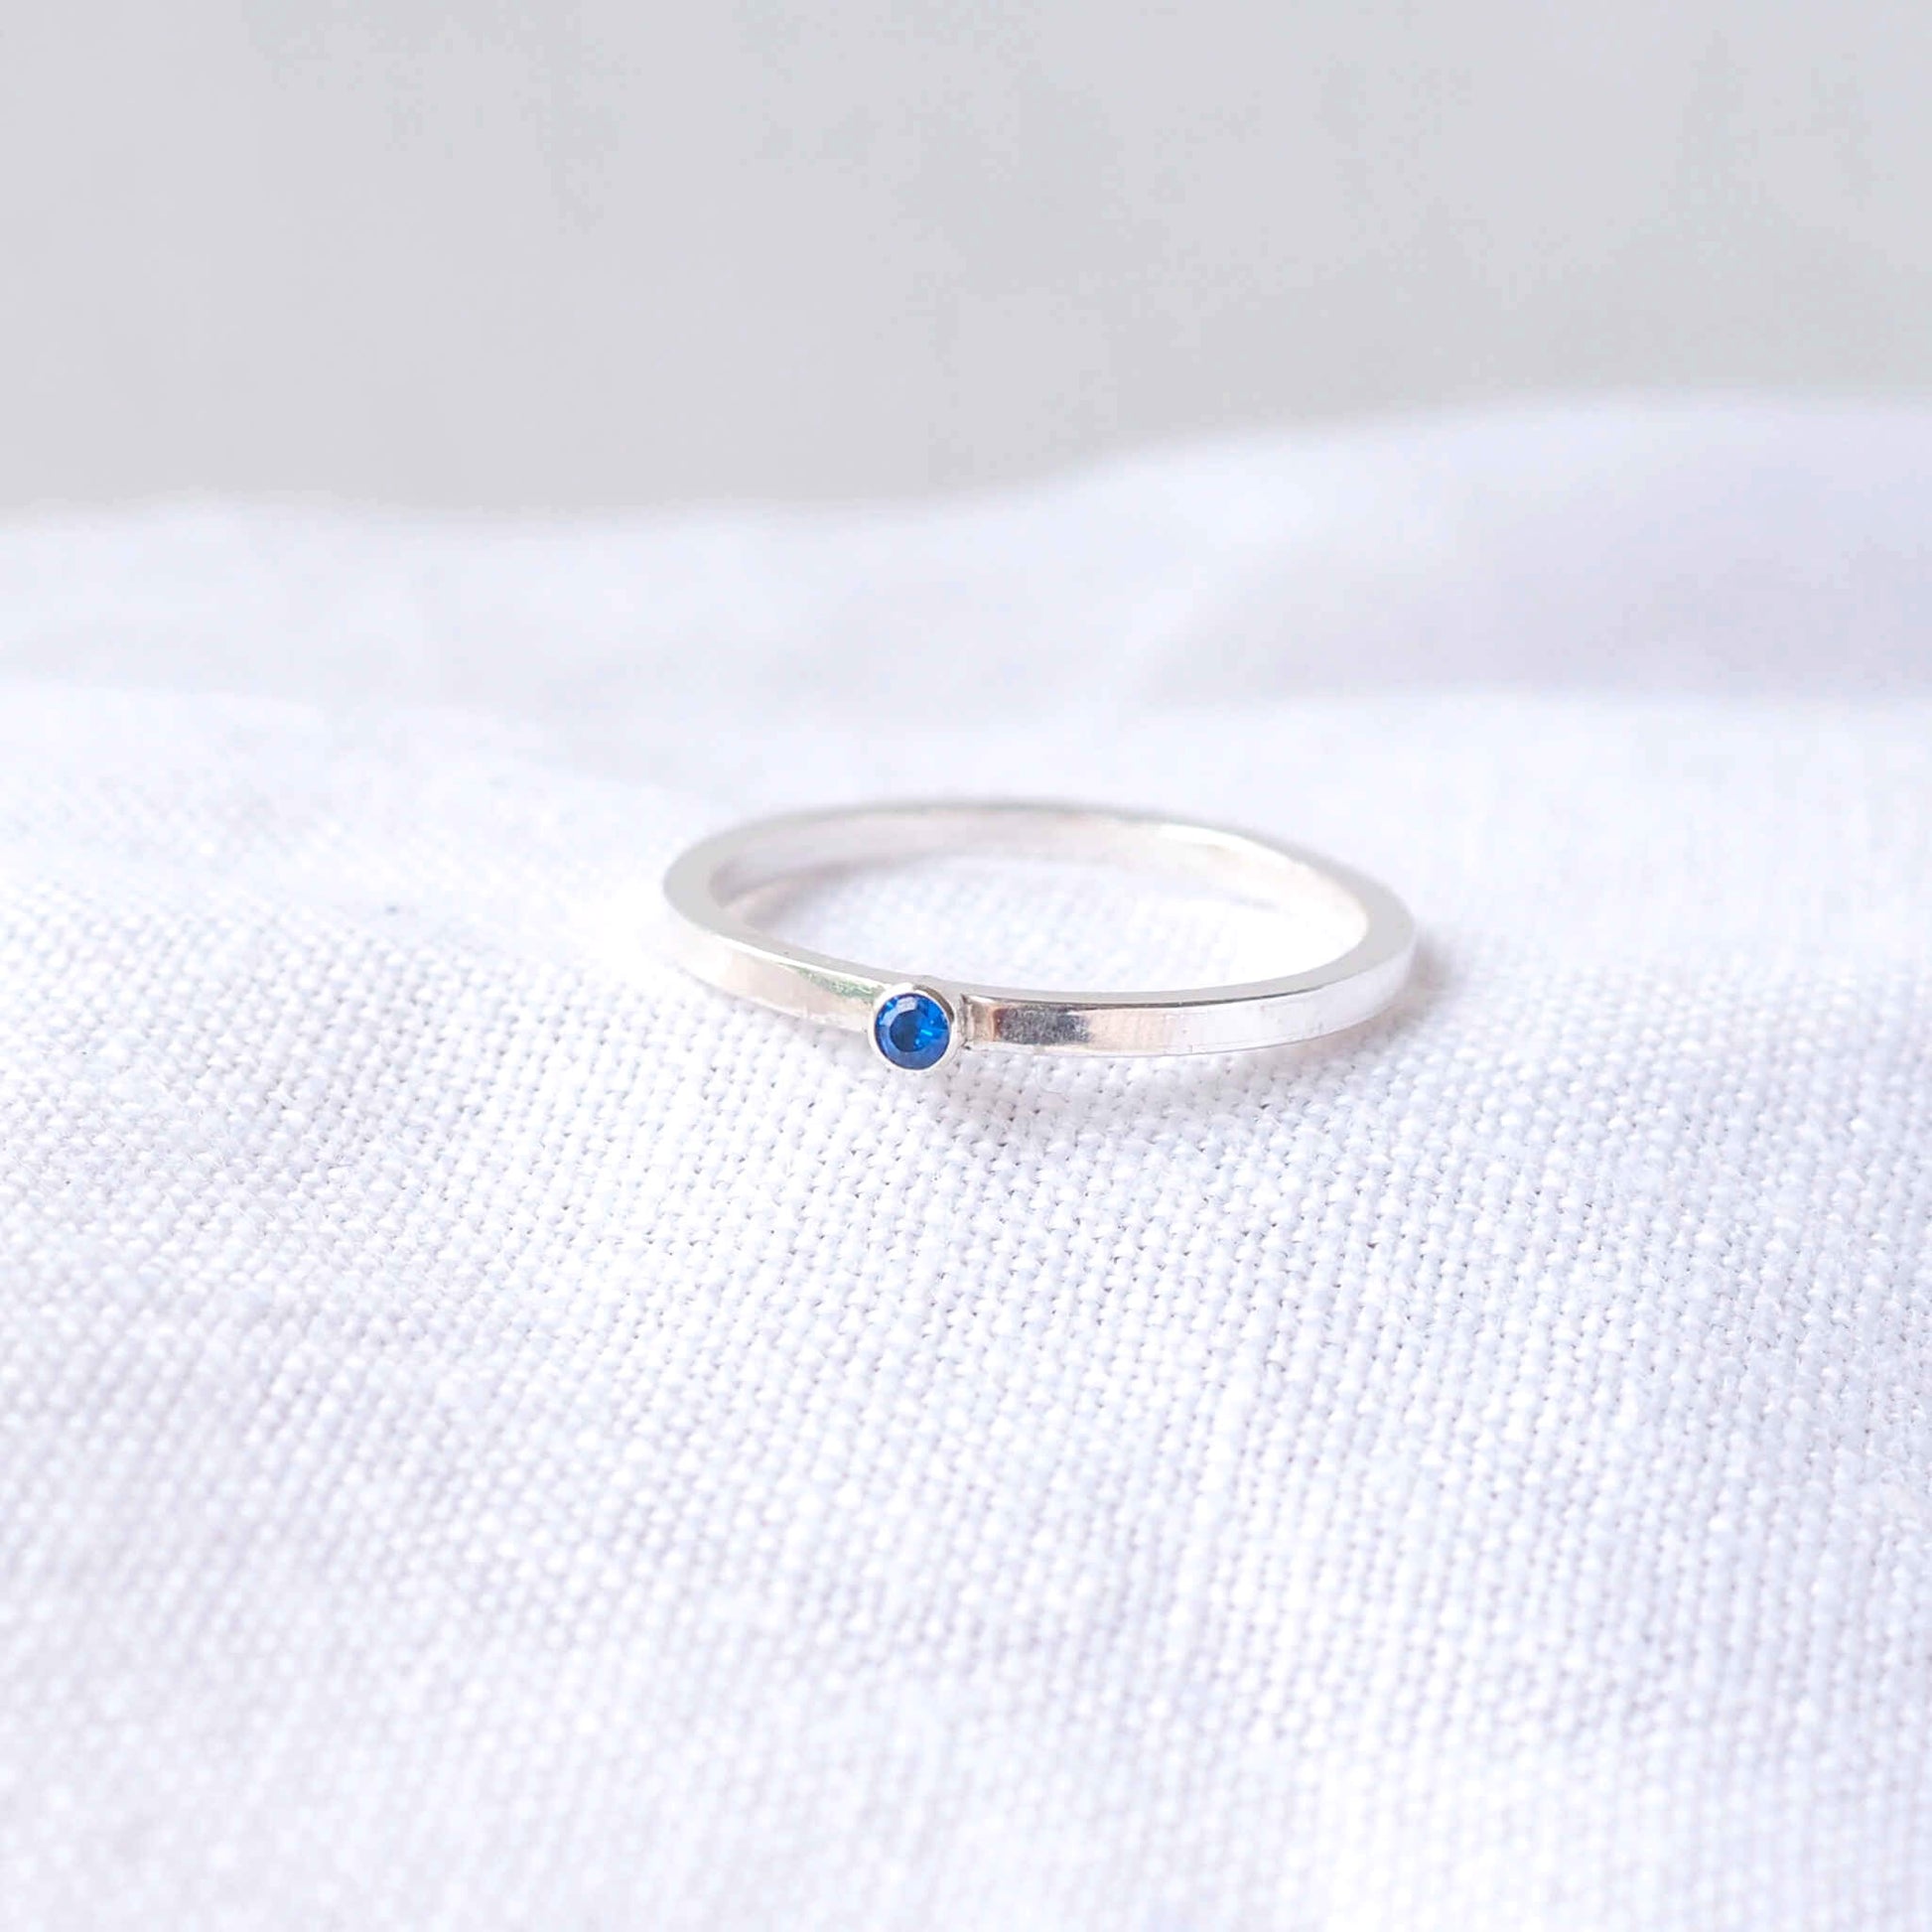 Silver and Blue Cubic Zirconia ring on a modern round square band with a small gemstone. The gem is a 2mm round cubic zirconia with plenty of sparkle. Handmade in Scotland by maram jewellery